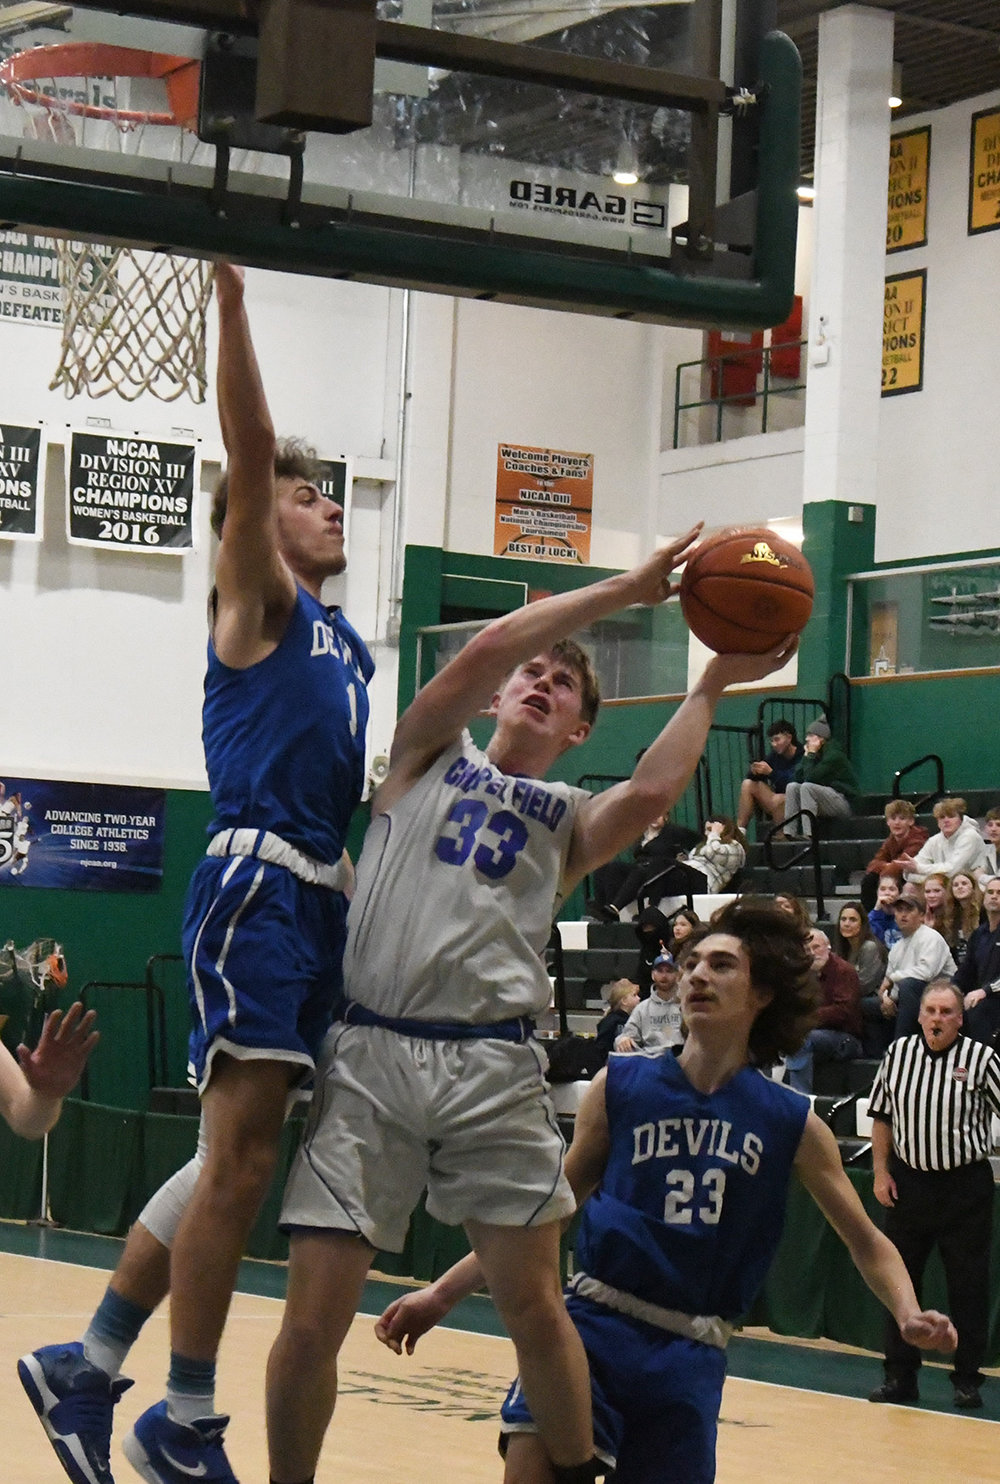 Chapel Field's Jonah McDuffie goes up for a shot as Roscoe's Anthony Teipeike defends and Zach Schwartz (23) looks on during Wednesday's Section 9 Class D championship boys' basketball game at SUNY Sullivan in Loch Sheldrake.